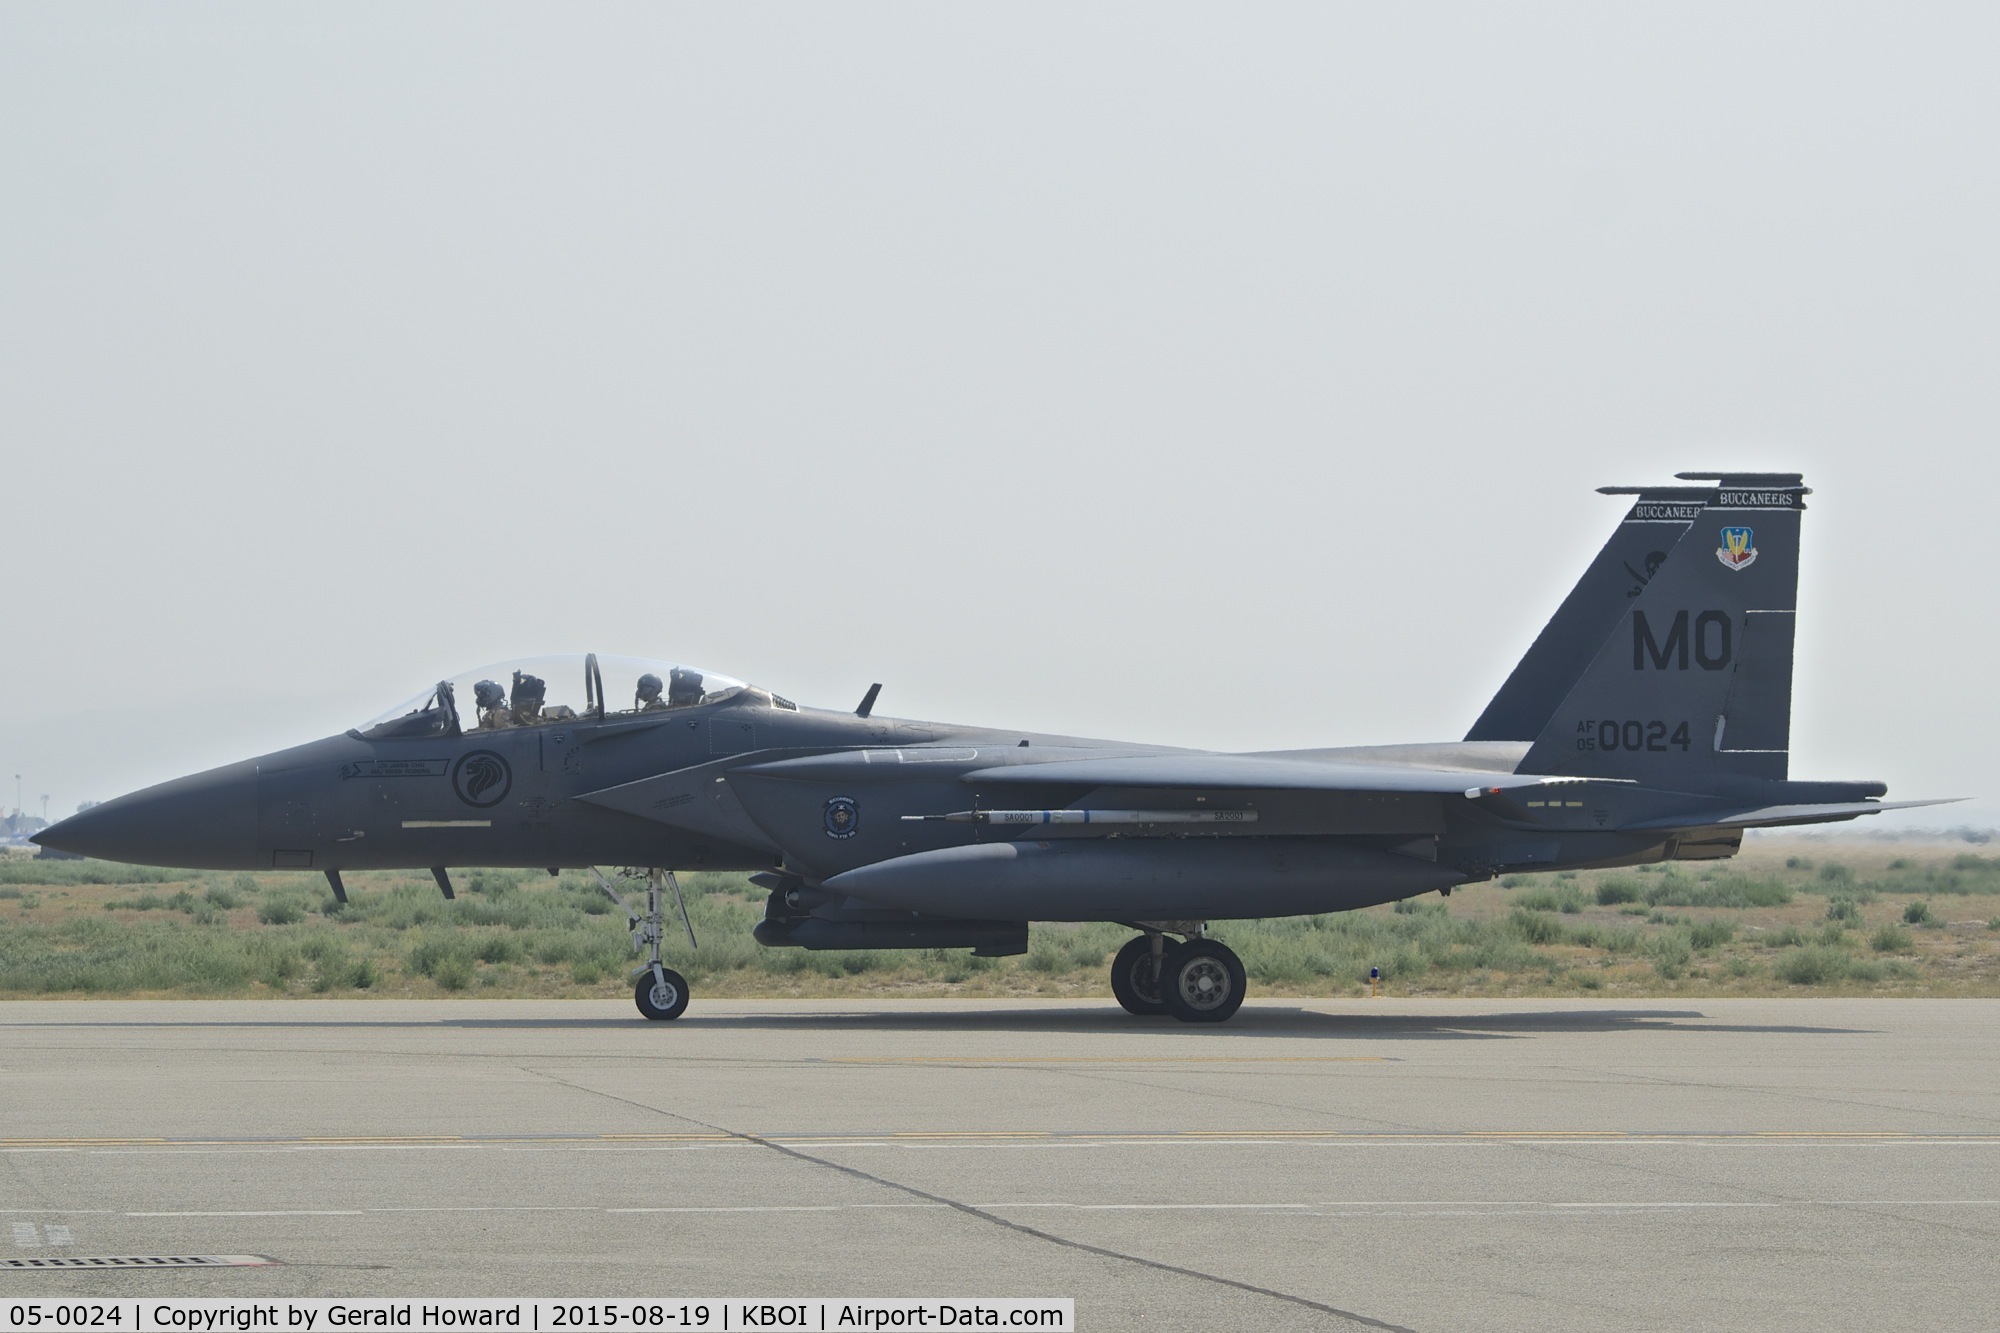 05-0024, 2005 Boeing F-15SG Strike Eagle C/N SG24, Waiting for clearance to RWY 10R on a very smoke filled day.  428th Fighter Sq. 